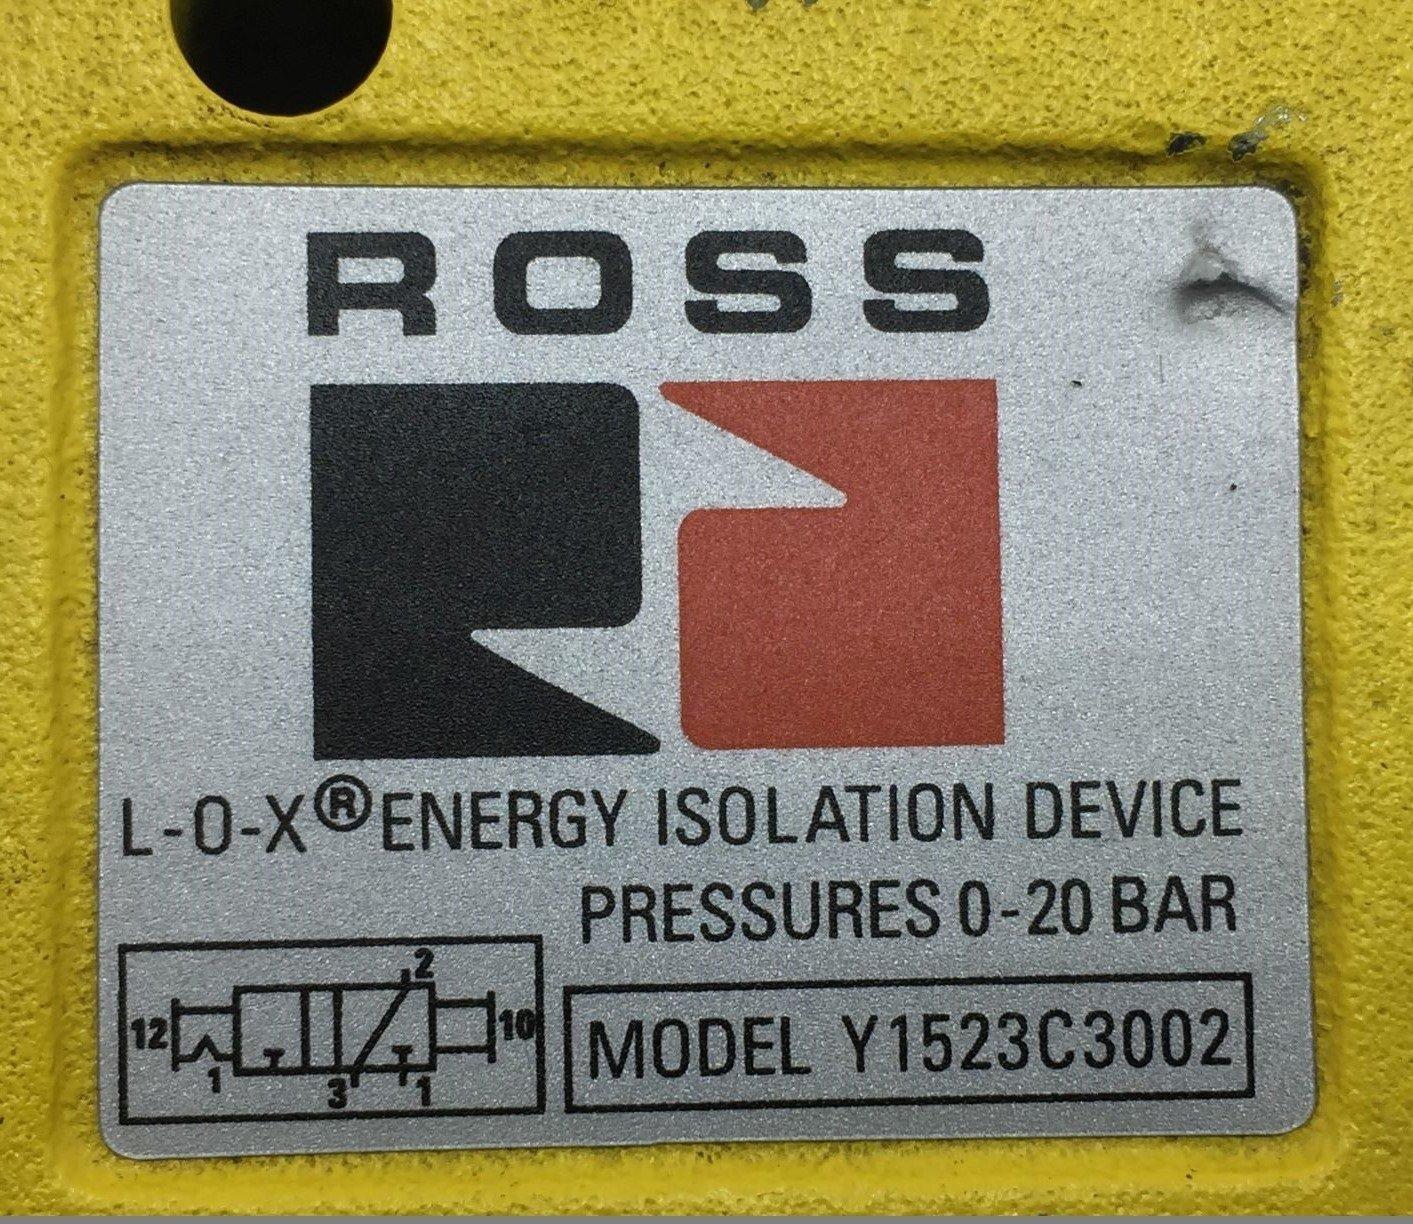  ROSS Y1523C3002 LOCKOUT VALVE TESTED 